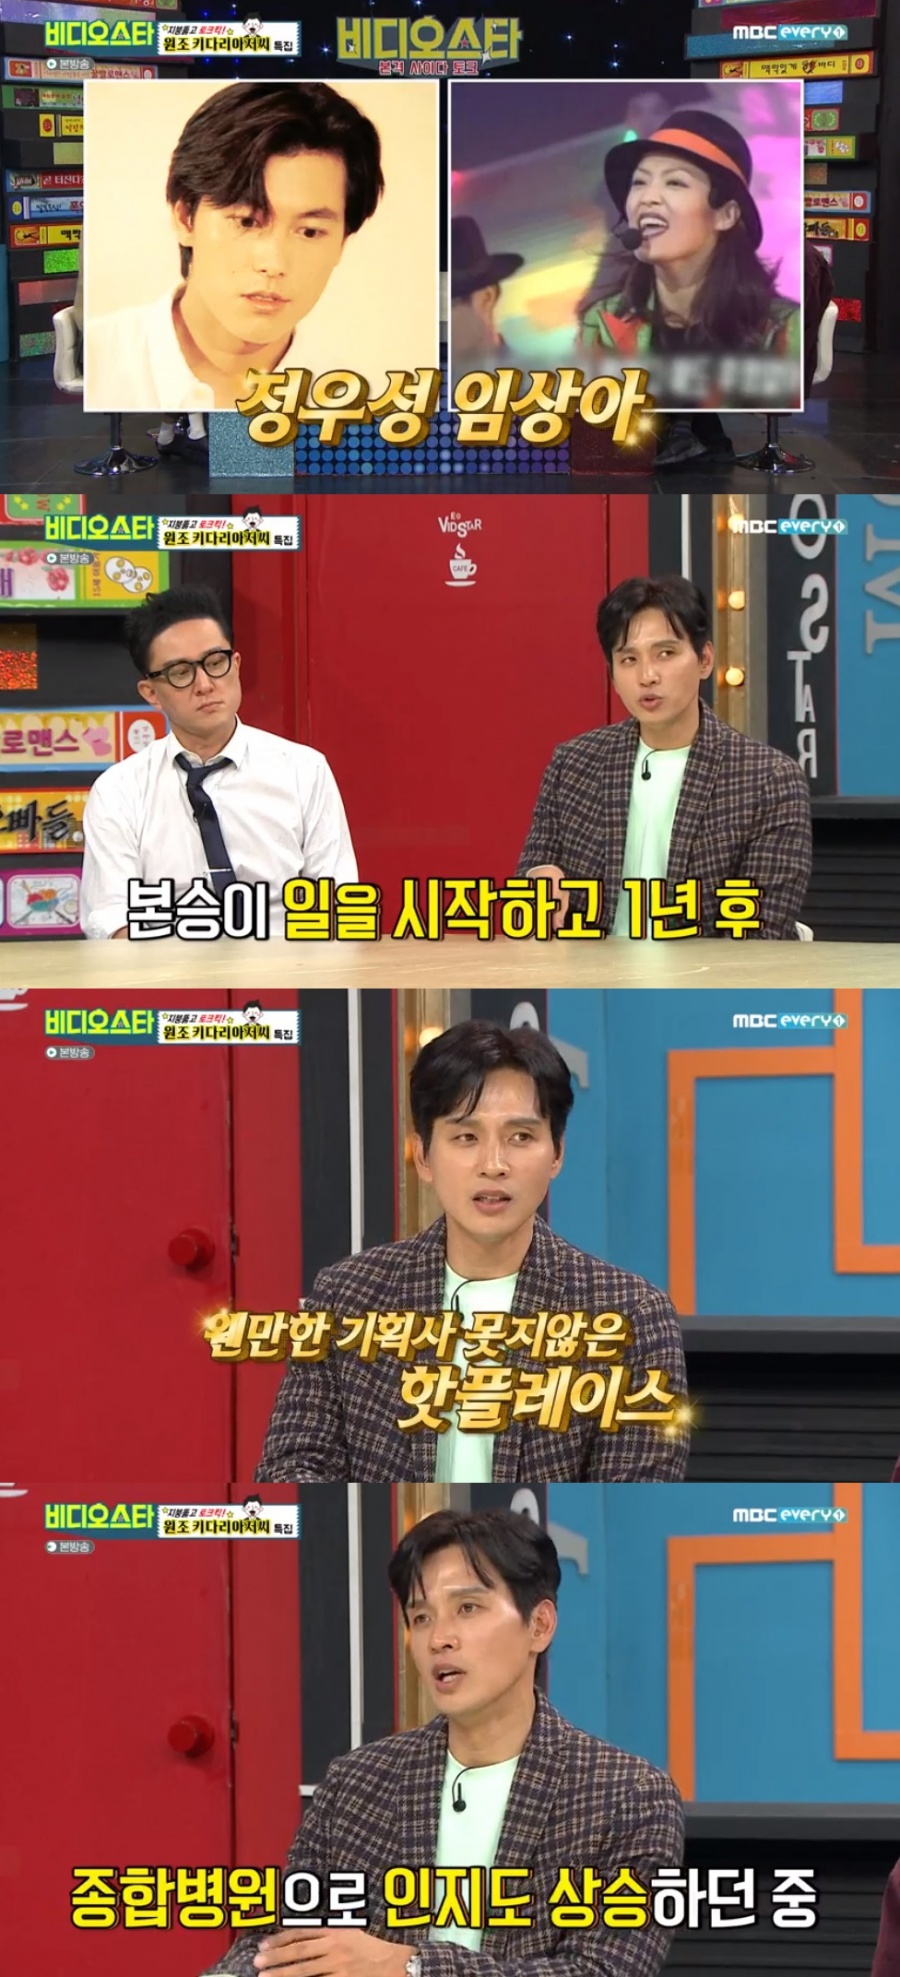 MBC every1 video star Goo Bon-seung revealed the story at the time of past activities.On MBC every1 video star broadcasted on the 25th, Goo Bon-seungs debut anecdote was broadcast.Park So-hyun said that Goo Bon-seung was cast in the past Cafe Alba.Even the Cafe where Goo Bon-seung worked was where Jung Woo-sung, Lim Sang-a worked.The manager then cast Mr. Jung Woo-sung; I came in and a year later, Mr. Lim Sang-a came in, Goo Bon-seung recalled.Shim Sin, who listened to the story, said, Is not that Cafe called Raguna?, Goo Bon-seung confessed to a special relationship that he was Alba and Shim Sin came as a regular.After being cast in Cafe, Goo Bon-seung was able to film the drama in three days, and then he appeared in the contest with Kang Ho-dong and Kim Hee-sun and then went to CF.In addition, the drama General Hospital and the past video that continued to be popular as a singer were released.